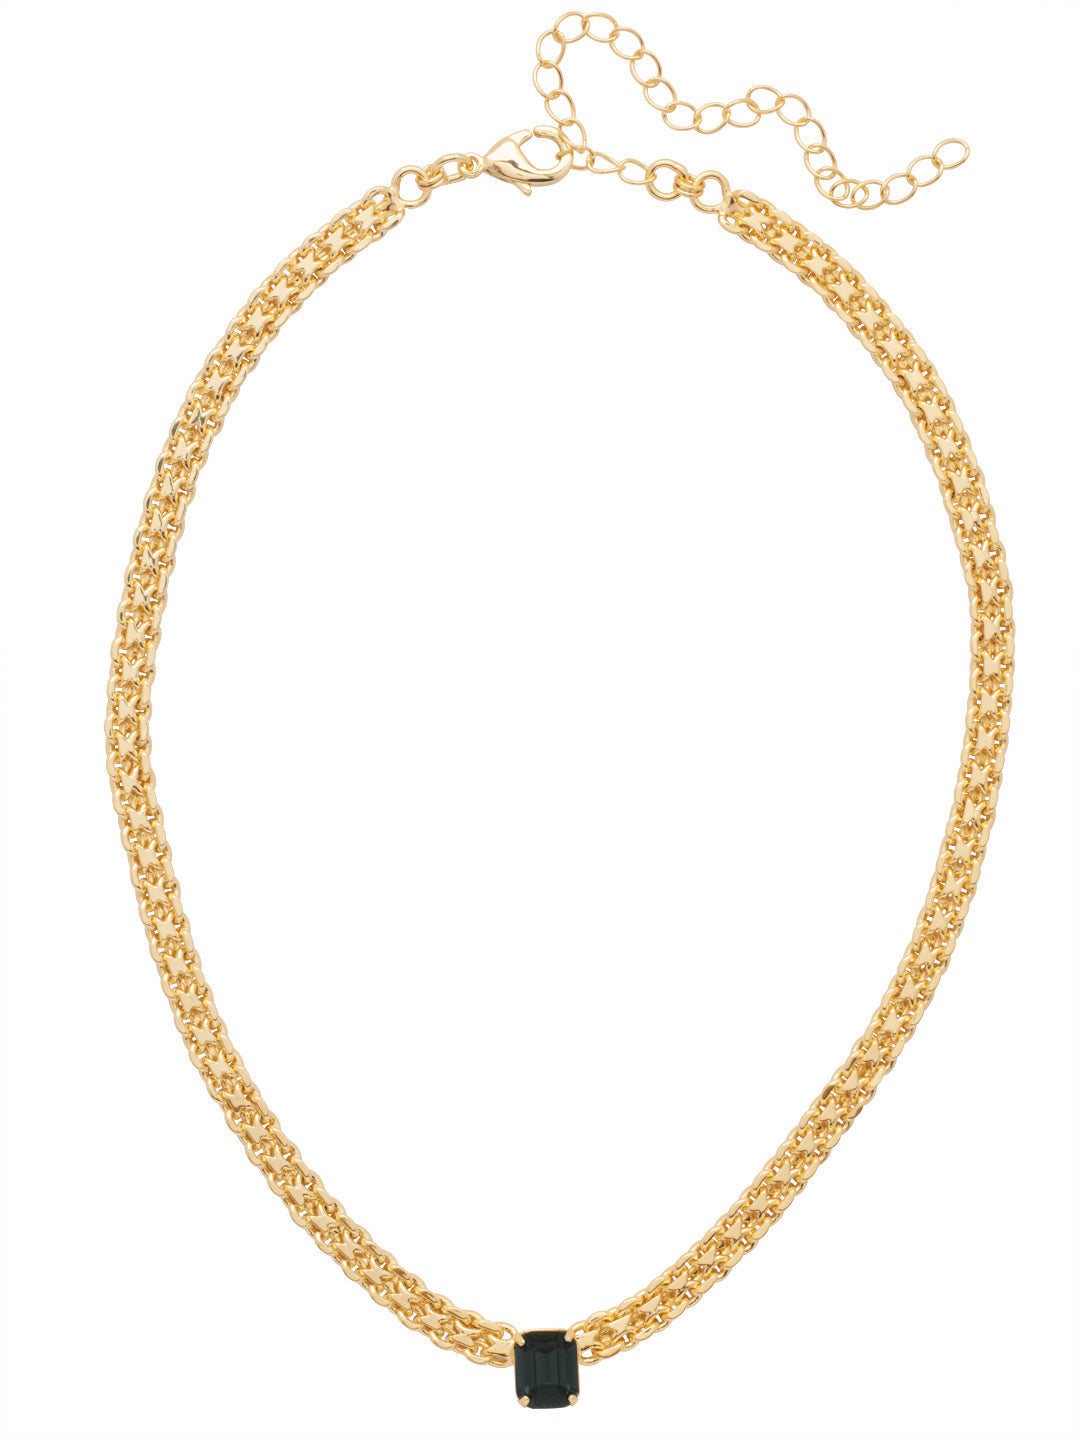 Octavia Tennis Necklace - NFK6BGMON - <p>The Octavia Tennis Necklace features a single petite emerald cut crystal on an adjustable chain, secured with a lobster claw clasp. From Sorrelli's Montana collection in our Bright Gold-tone finish.</p>